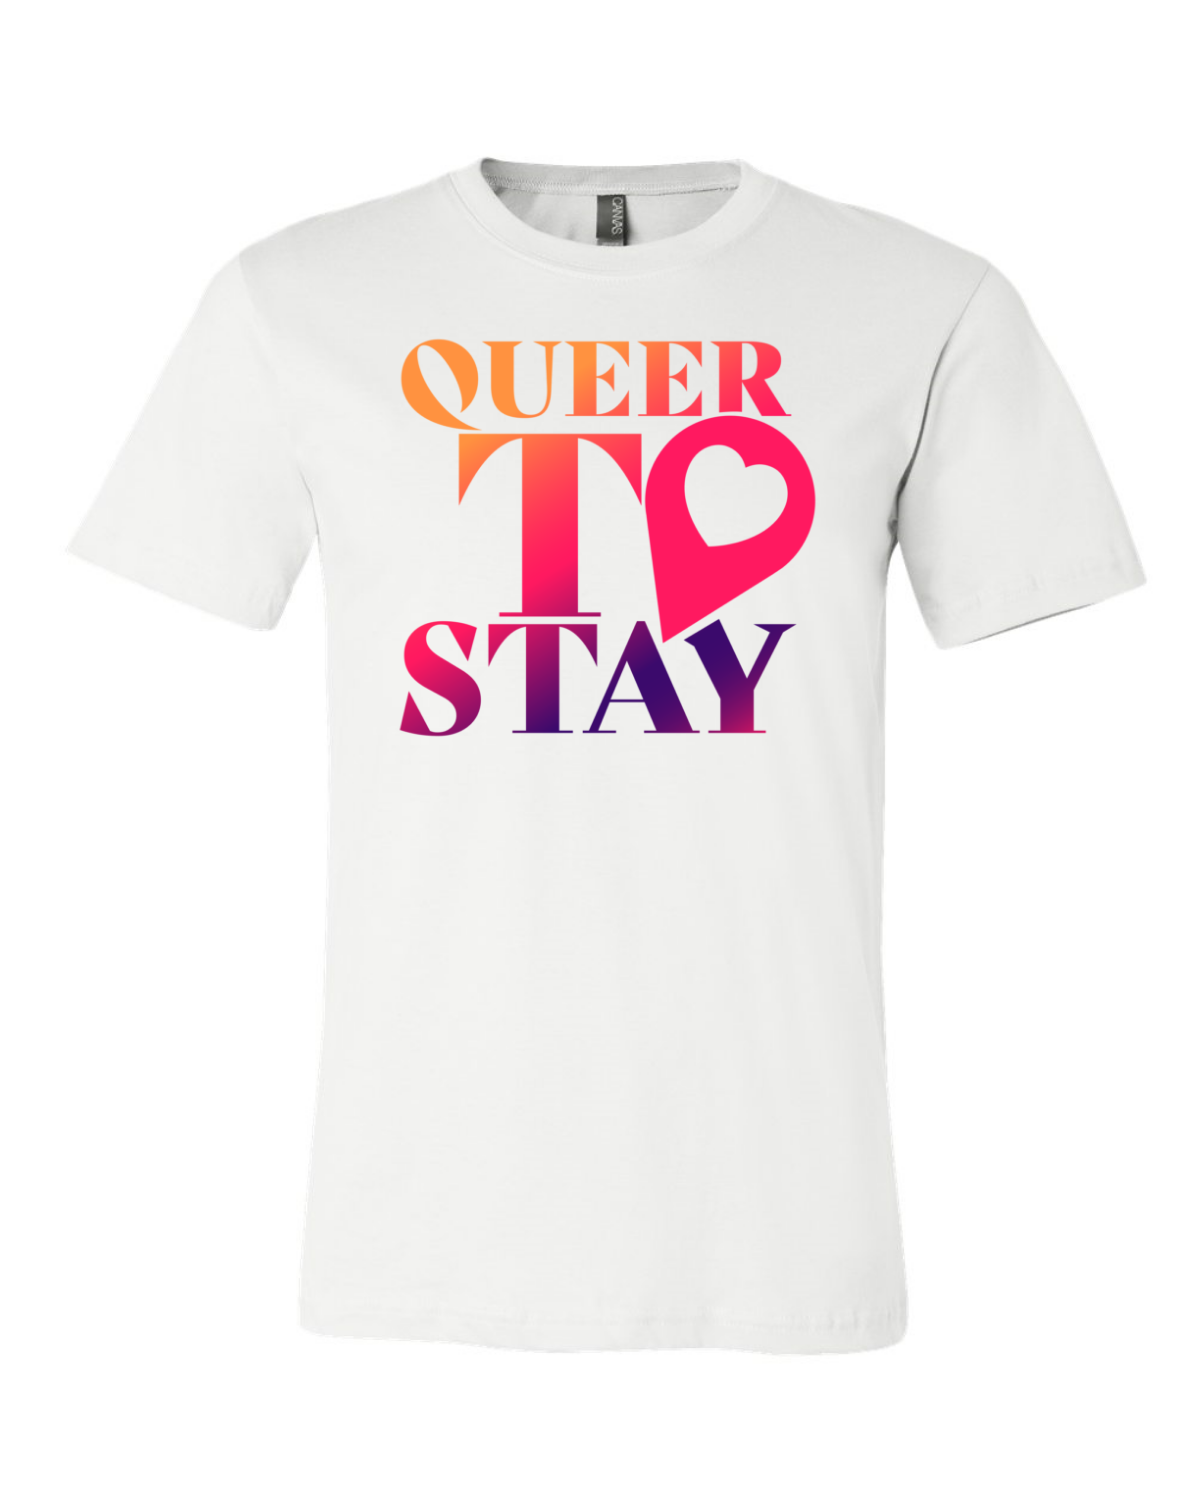 SHOWTIME Queer to Stay Logo Adult Short Sleeve T-Shirt